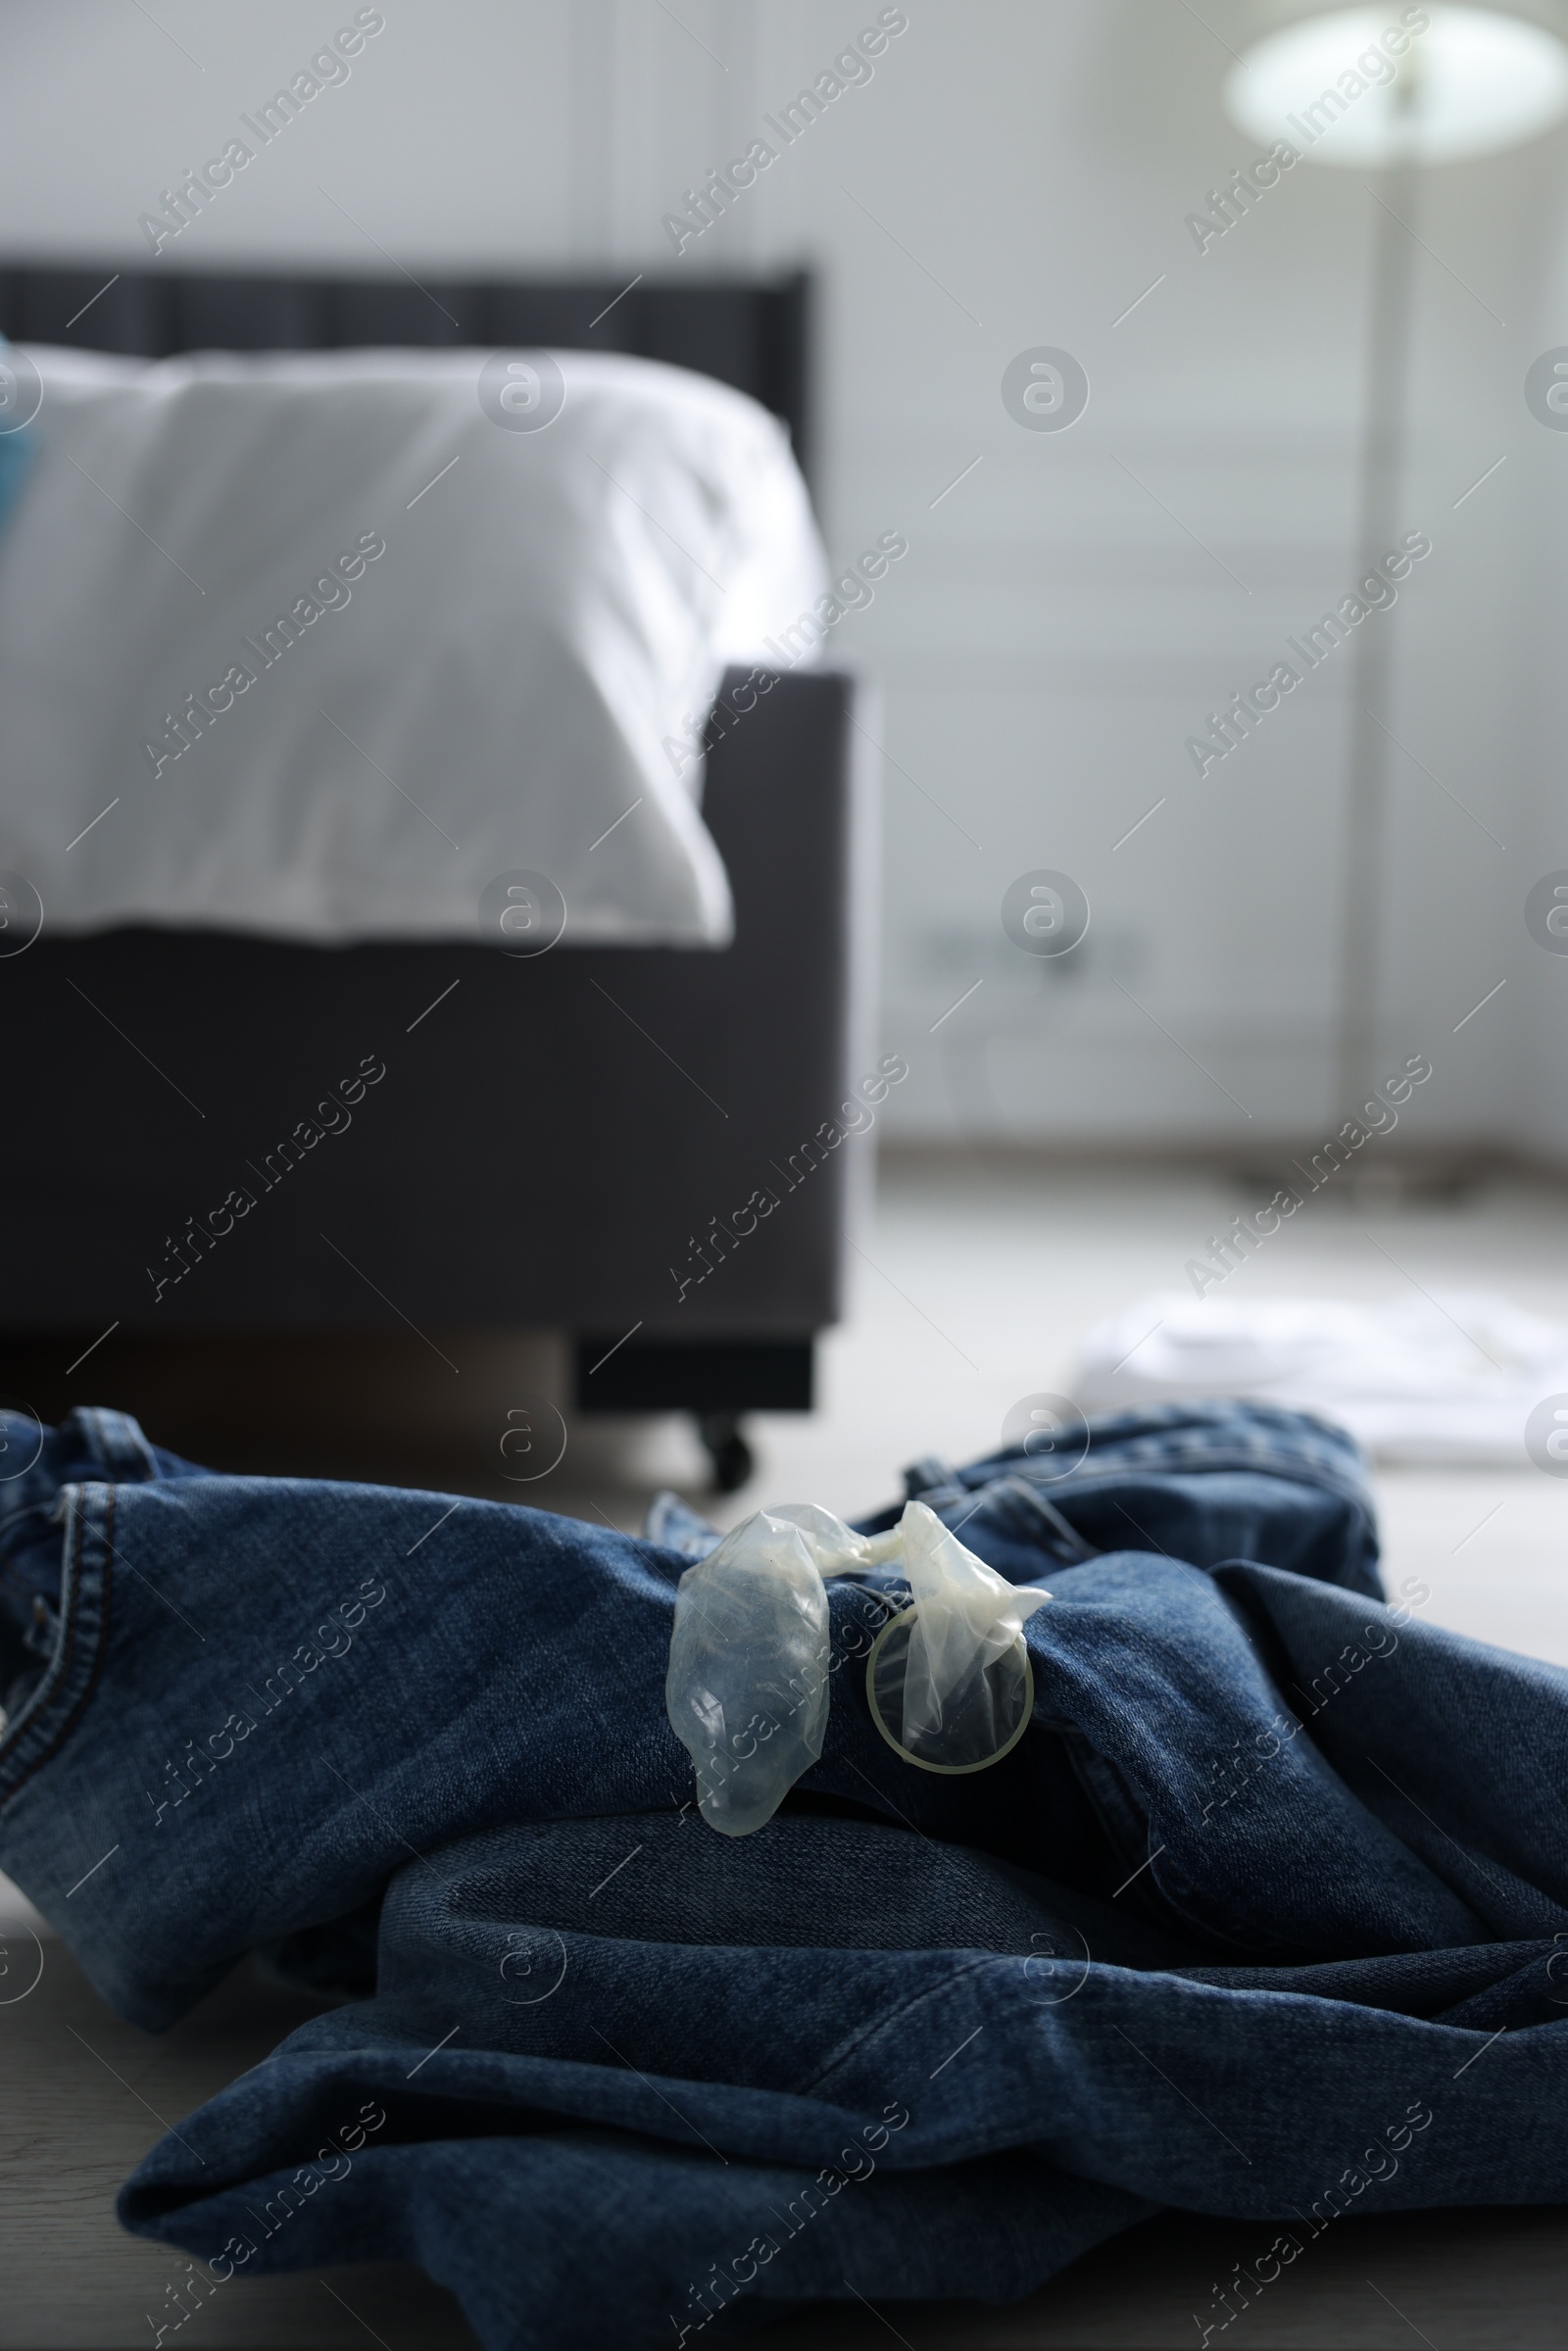 Photo of Unrolled condom and jeans on floor in bedroom. Safe sex